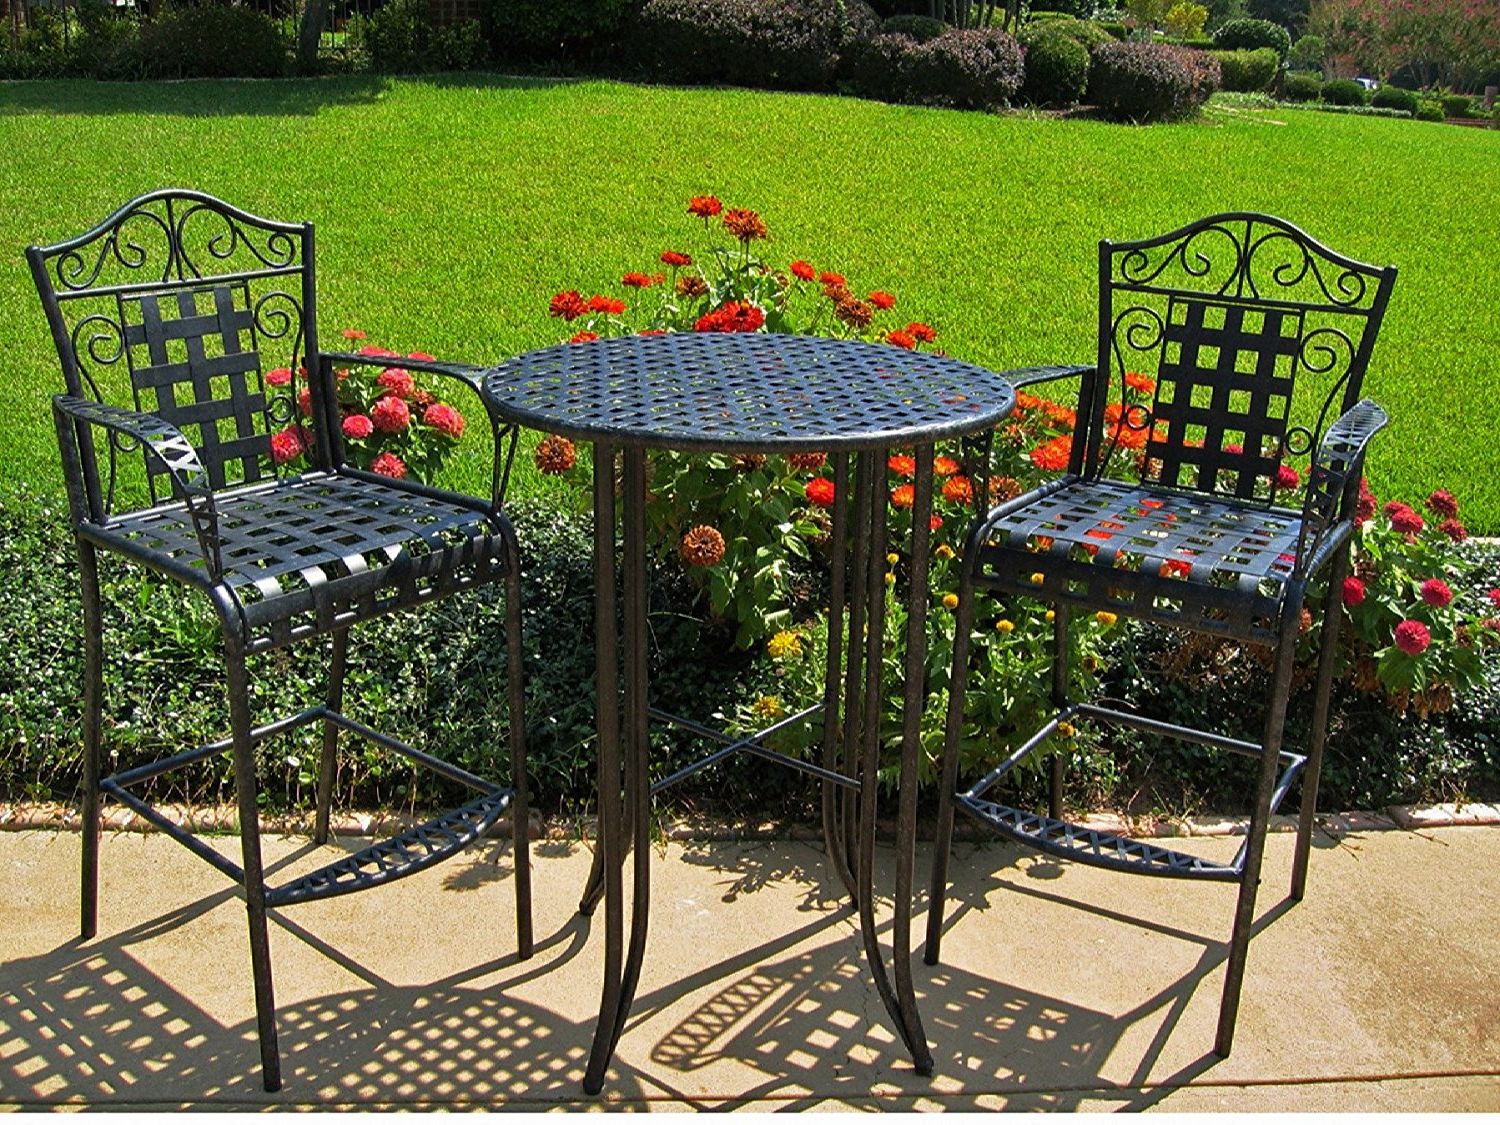 3 Piece Patio Bistro Sets Within Preferred 3 Piece Bar Height Patio Bistro Sets For The Outdoors – Reviews (View 8 of 15)